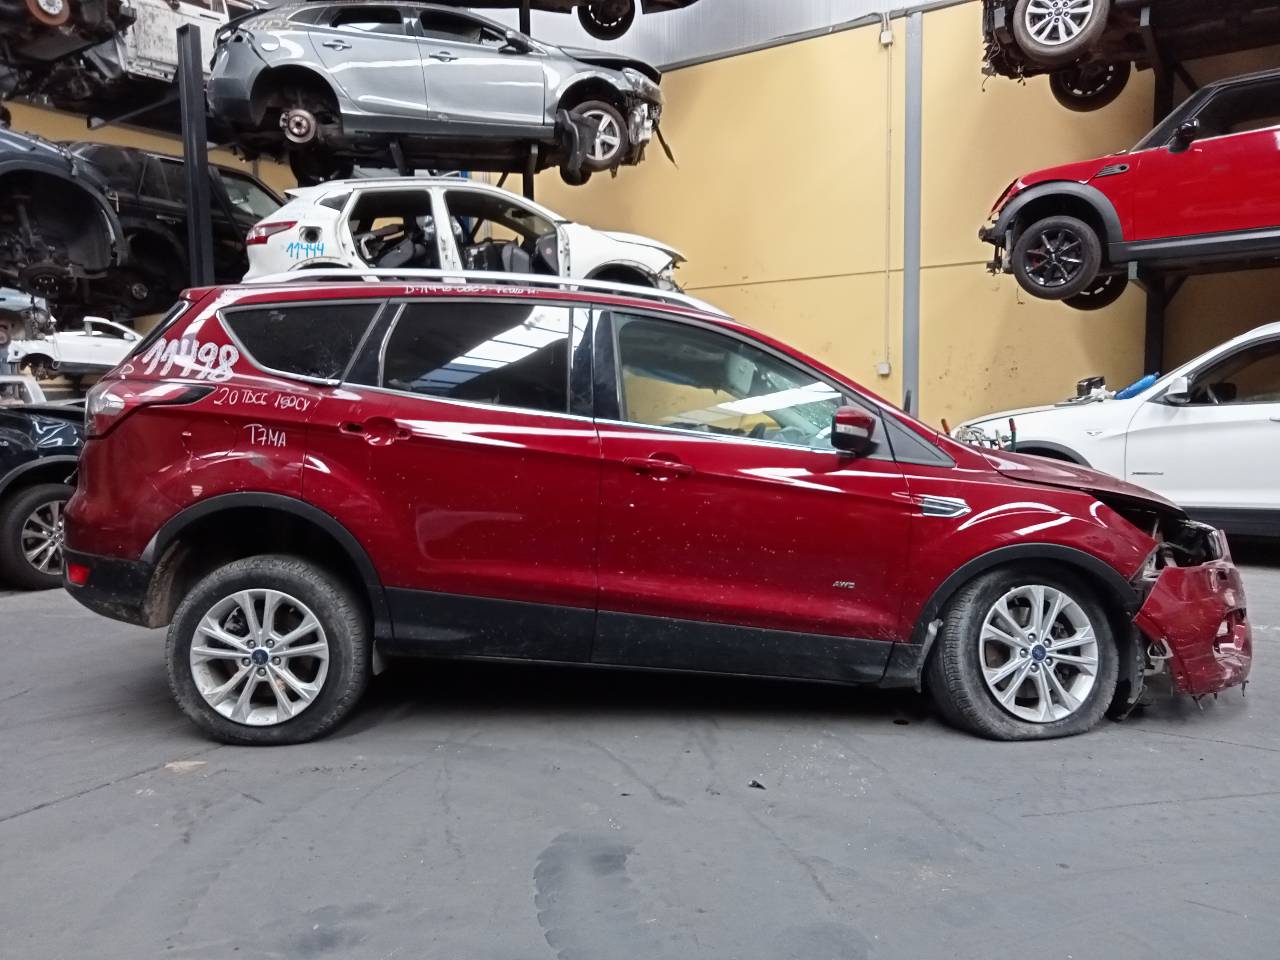 FORD Kuga 2 generation (2013-2020) Стартер MS4380000270, DS7T11000LE, P3-B8-4-4 21602922